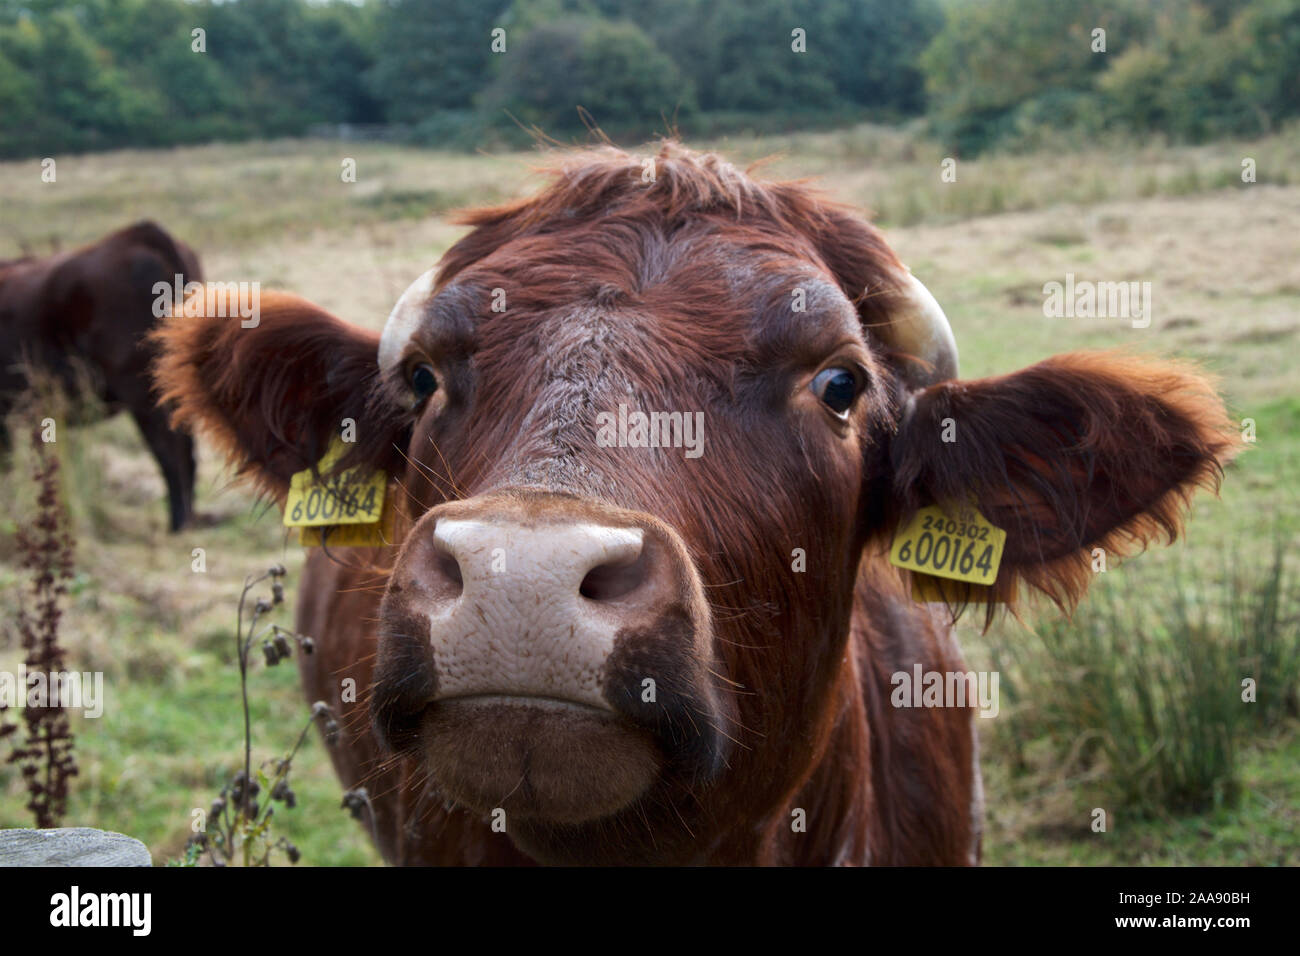 Dexter bullock's face, up close, showing nose, mouth, eyes, ears and short horns. Stock Photo